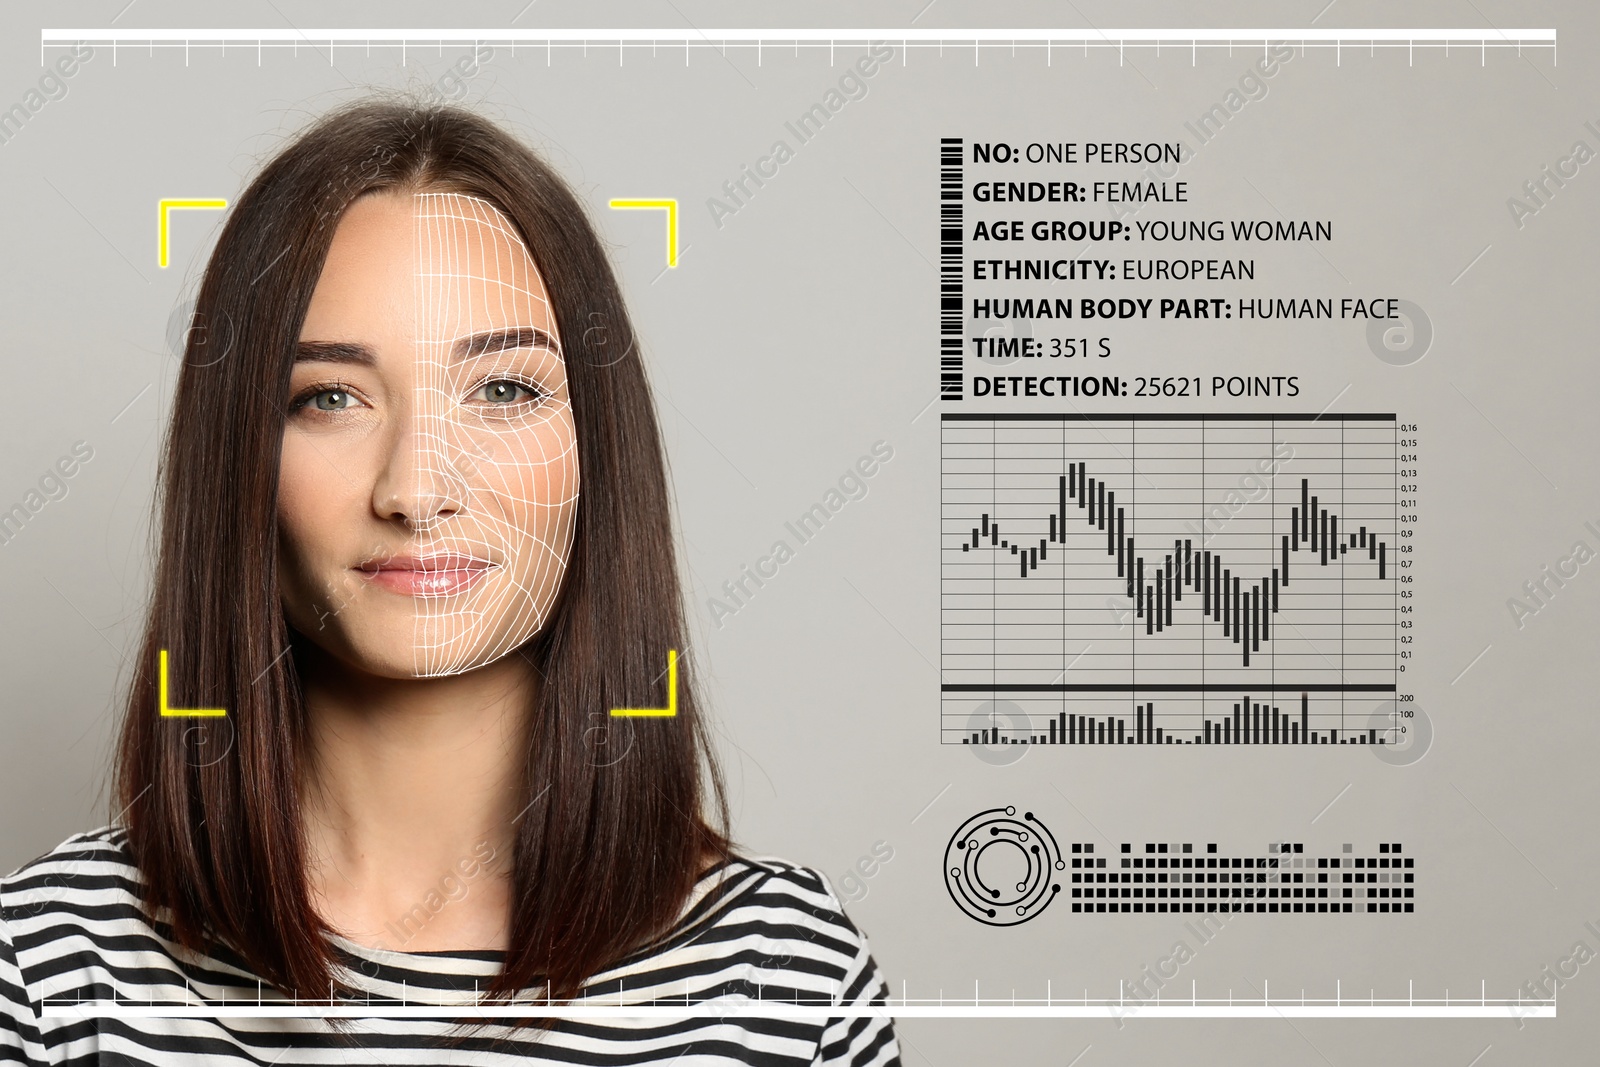 Image of Facial recognition system. Woman with scanner frame, digital biometric grid and personal data on grey background